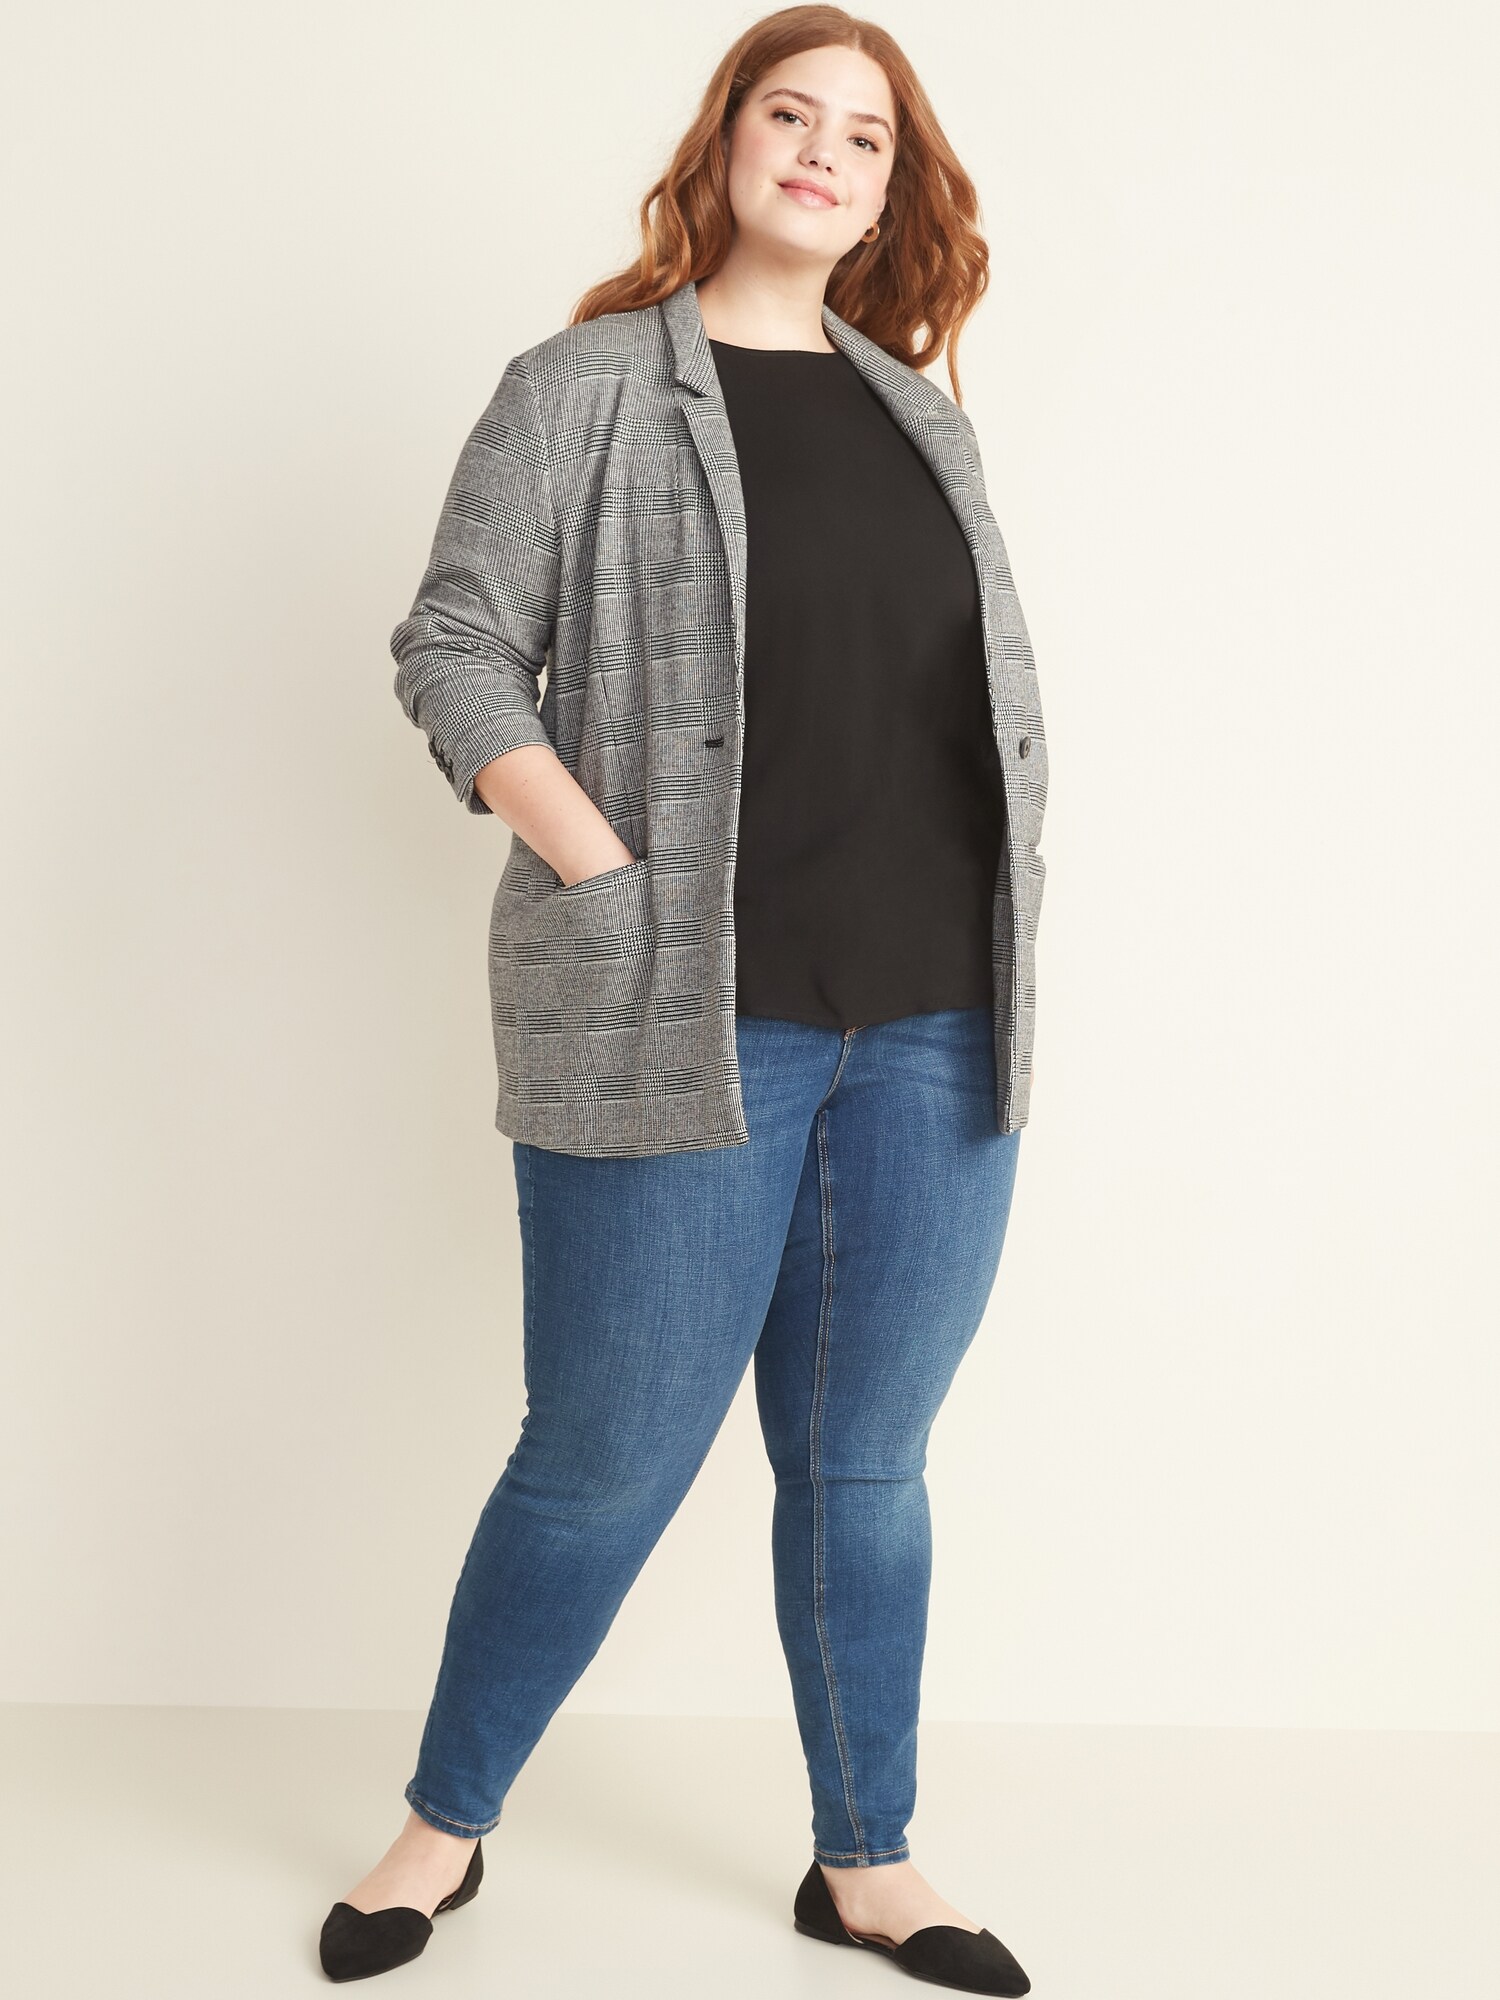 High-Neck Sleeveless Plus-Size Top | Old Navy